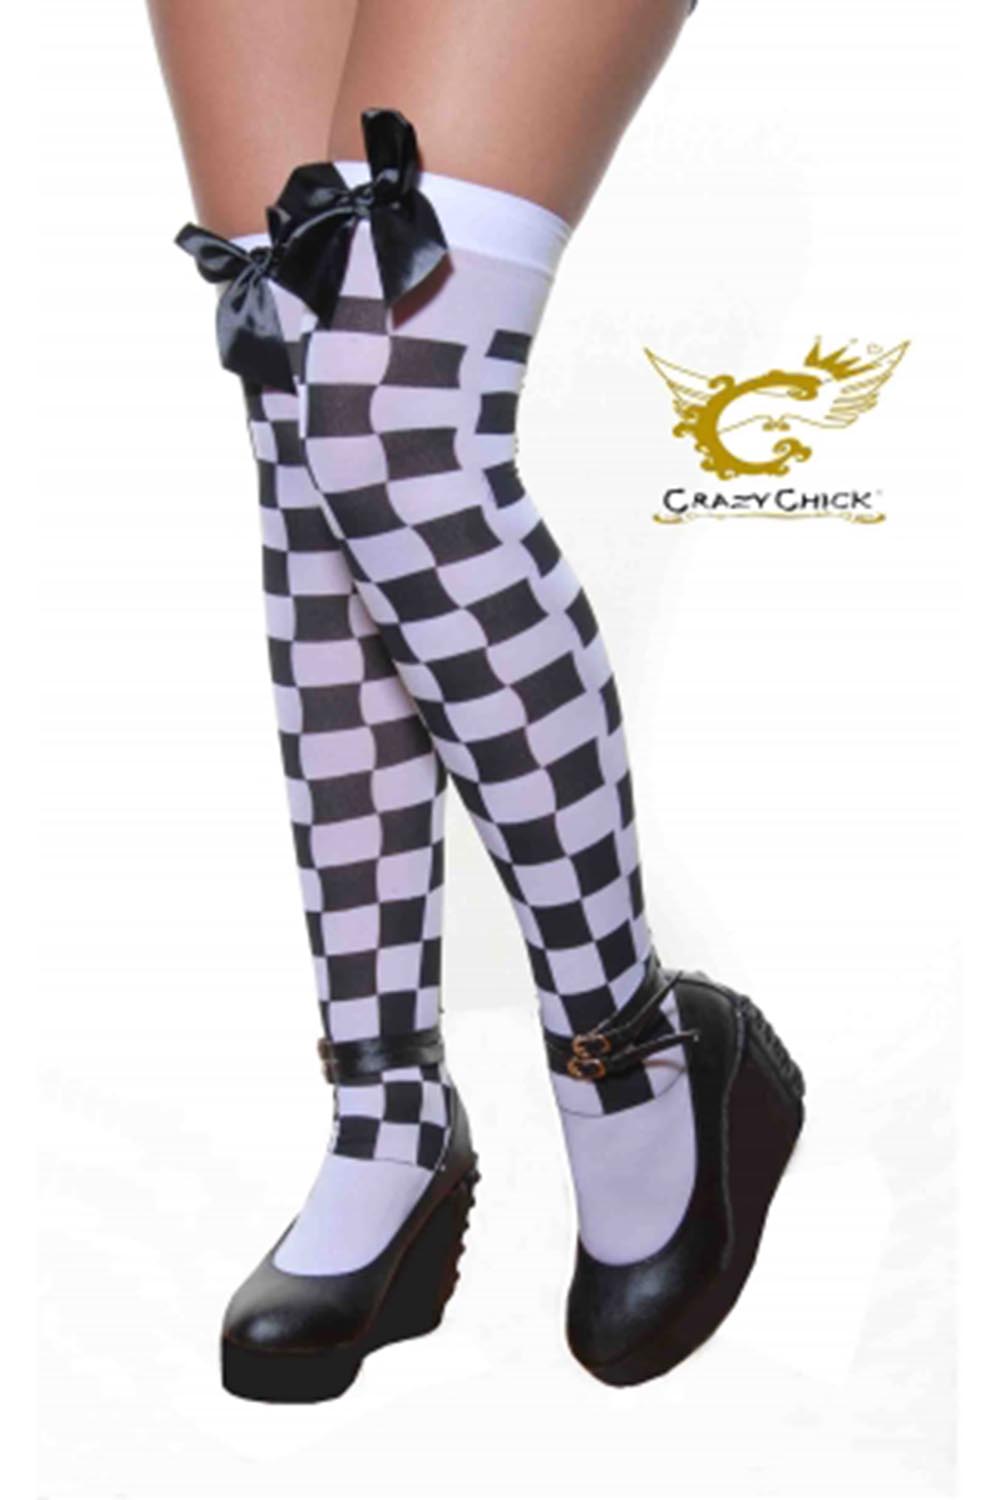 Crazy Chick White and Black Checkered Stockings With Black Bow